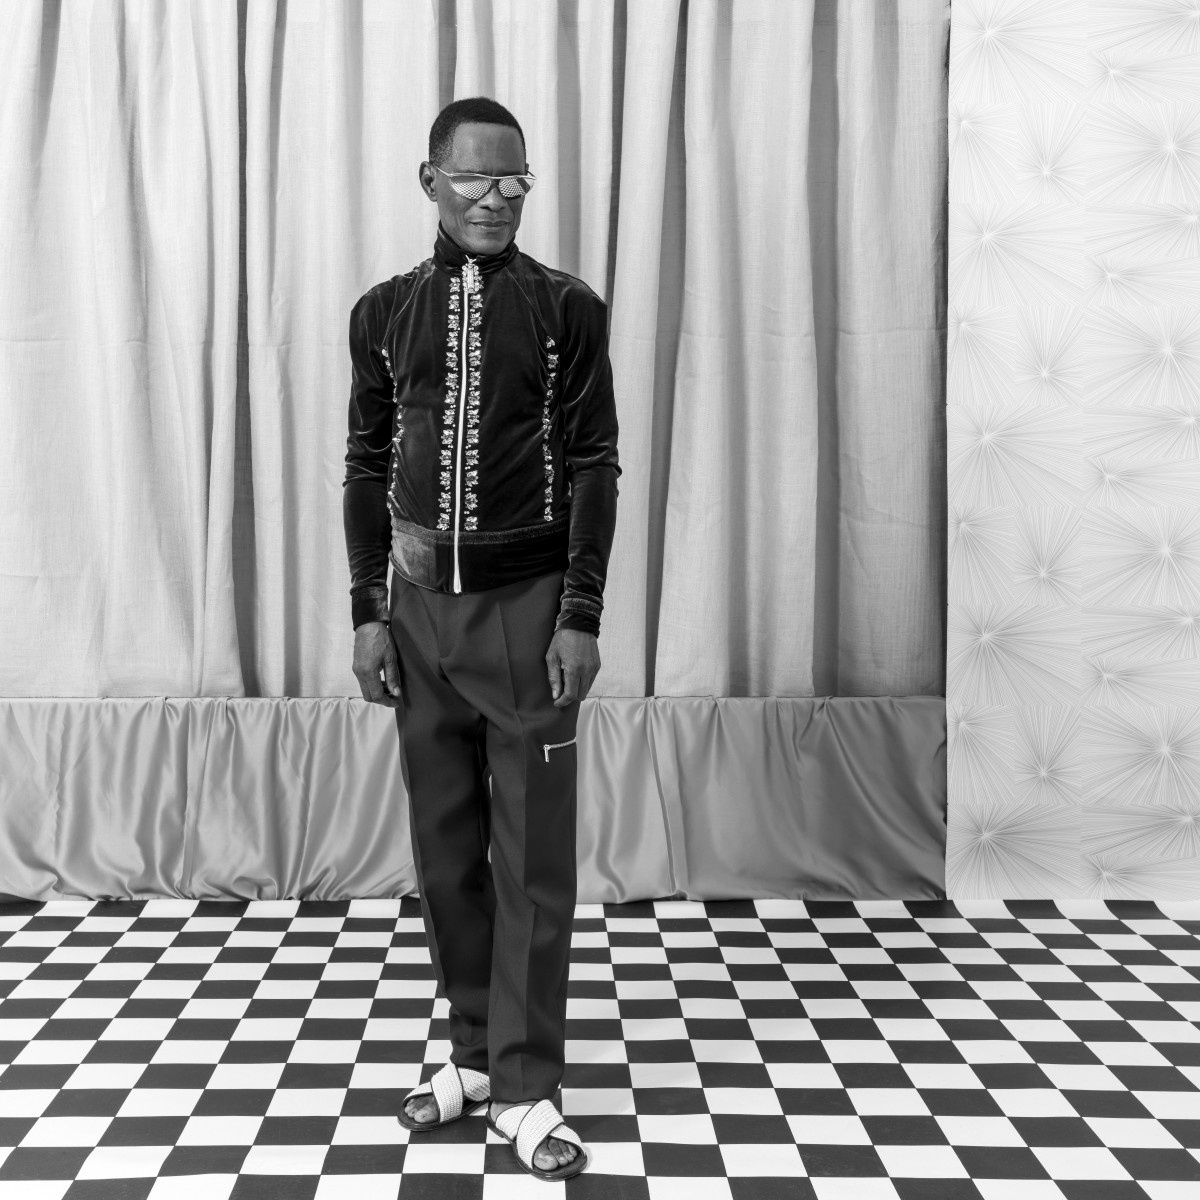 Samuel Fosso's monochrome photograph 'Autoportraits II (Fosso Fashion)' depicts an individual standing on a checkered floor.
